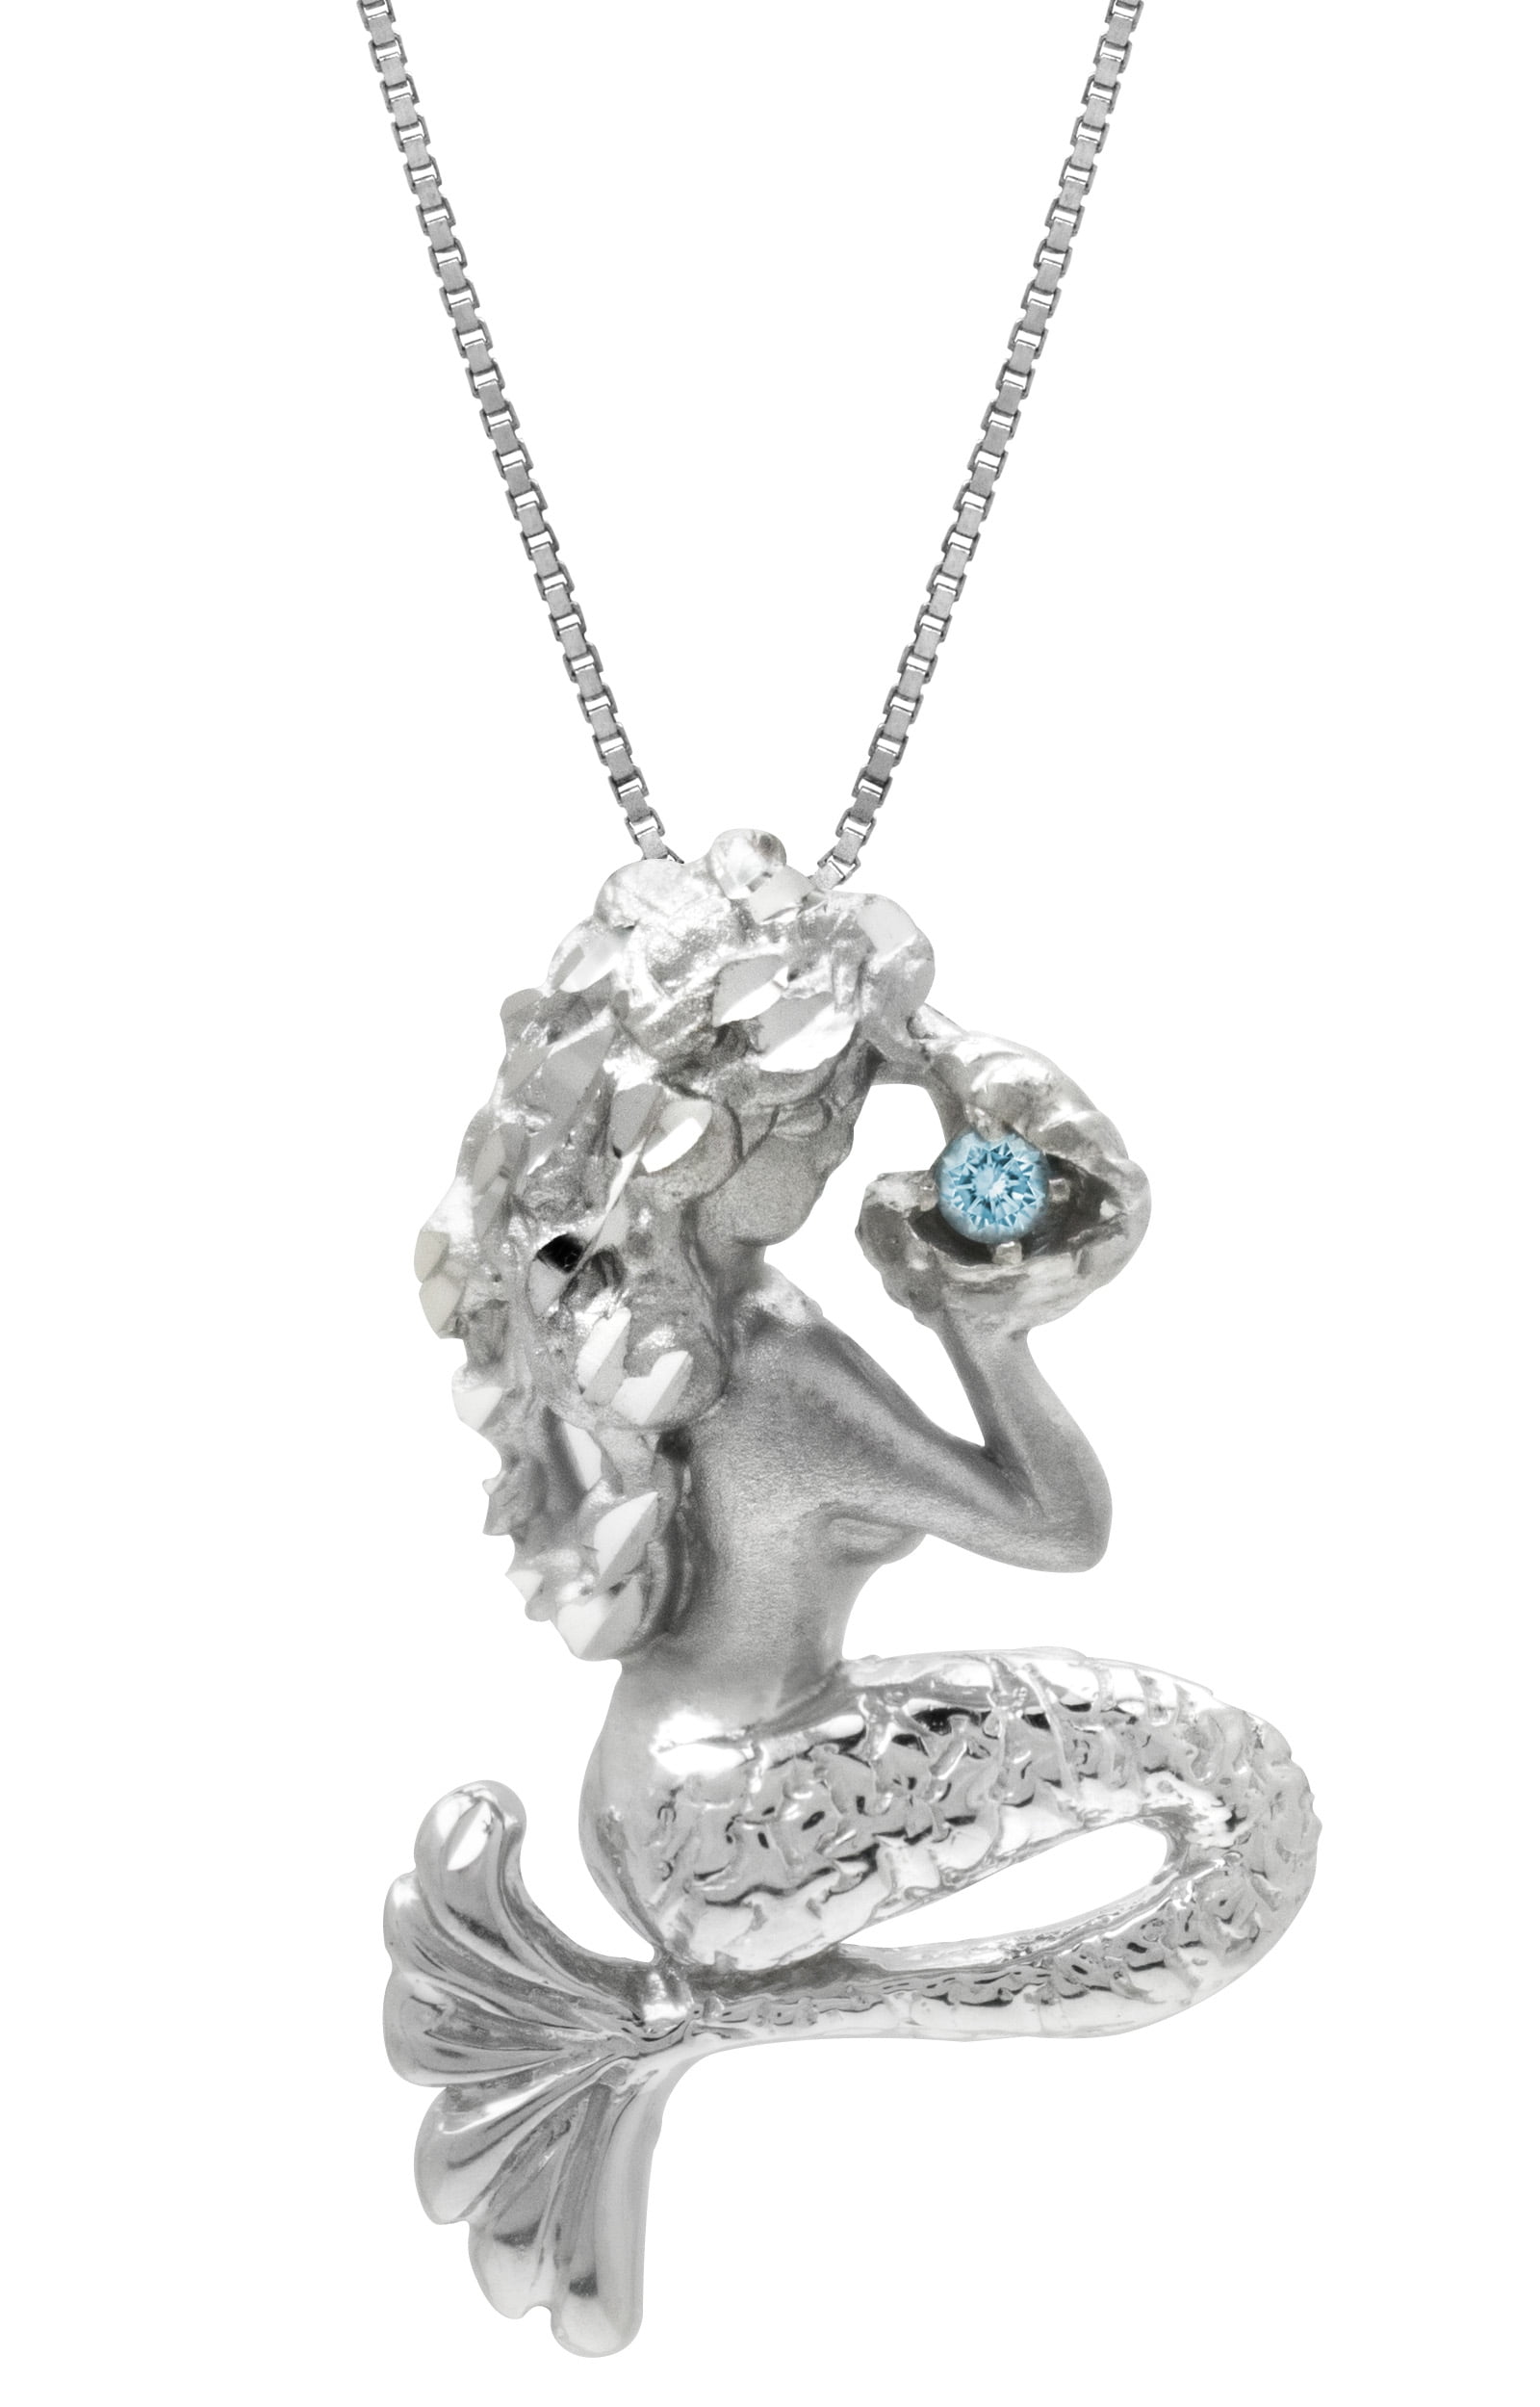 Honolulu Jewelry - Sterling Silver and Blue Topaz Mermaid Necklace